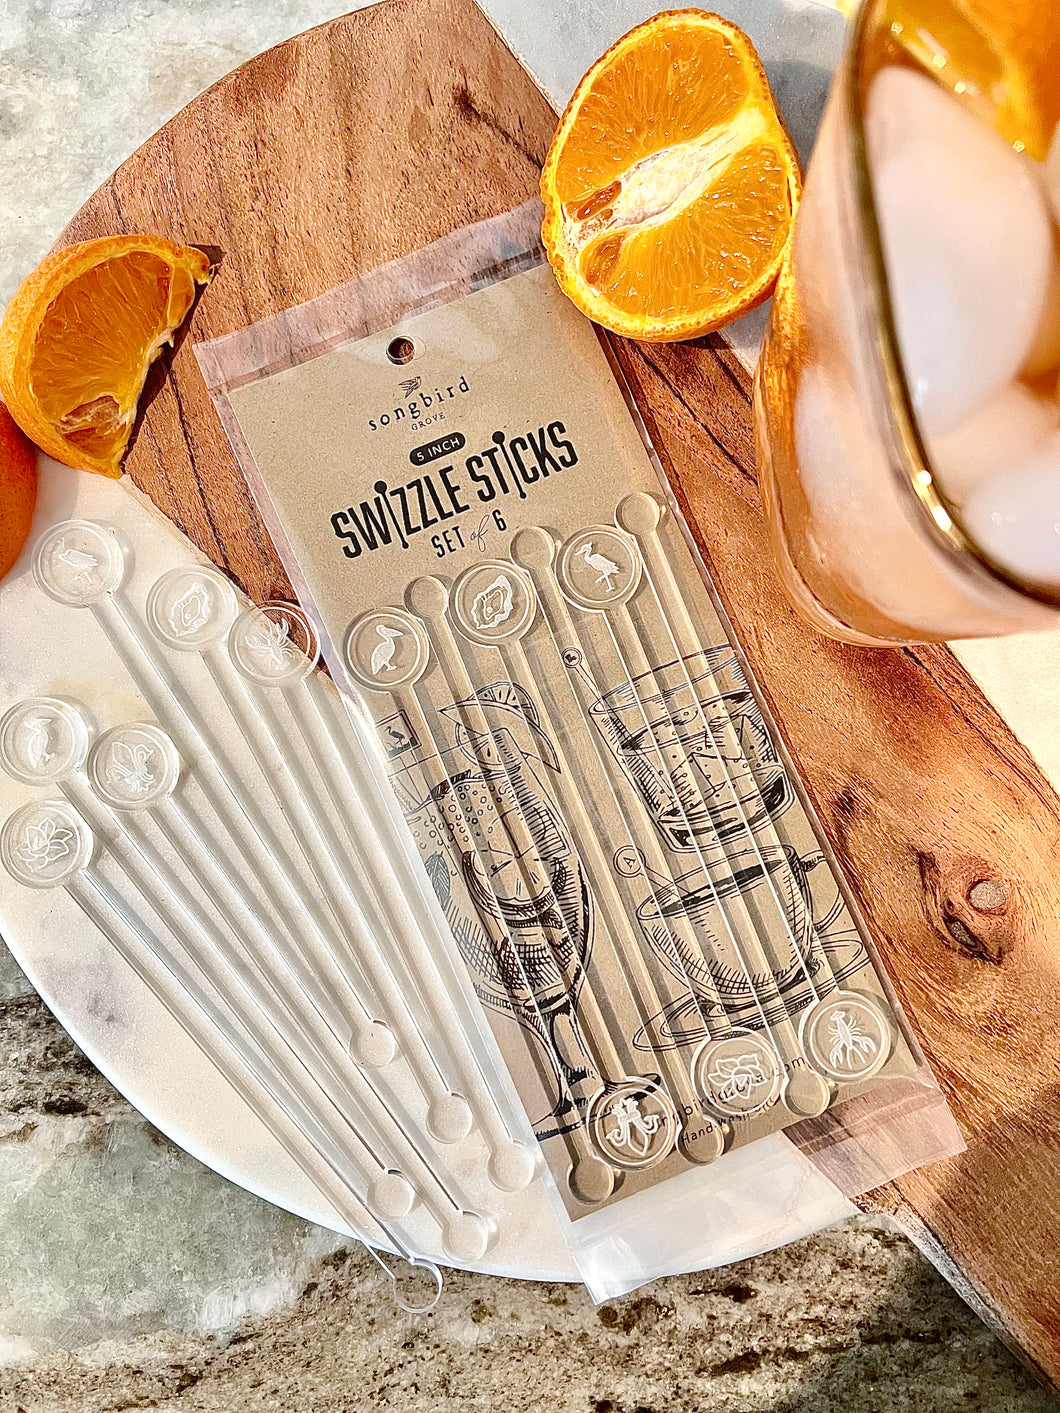 Southern Collection Swizzle Stick Set